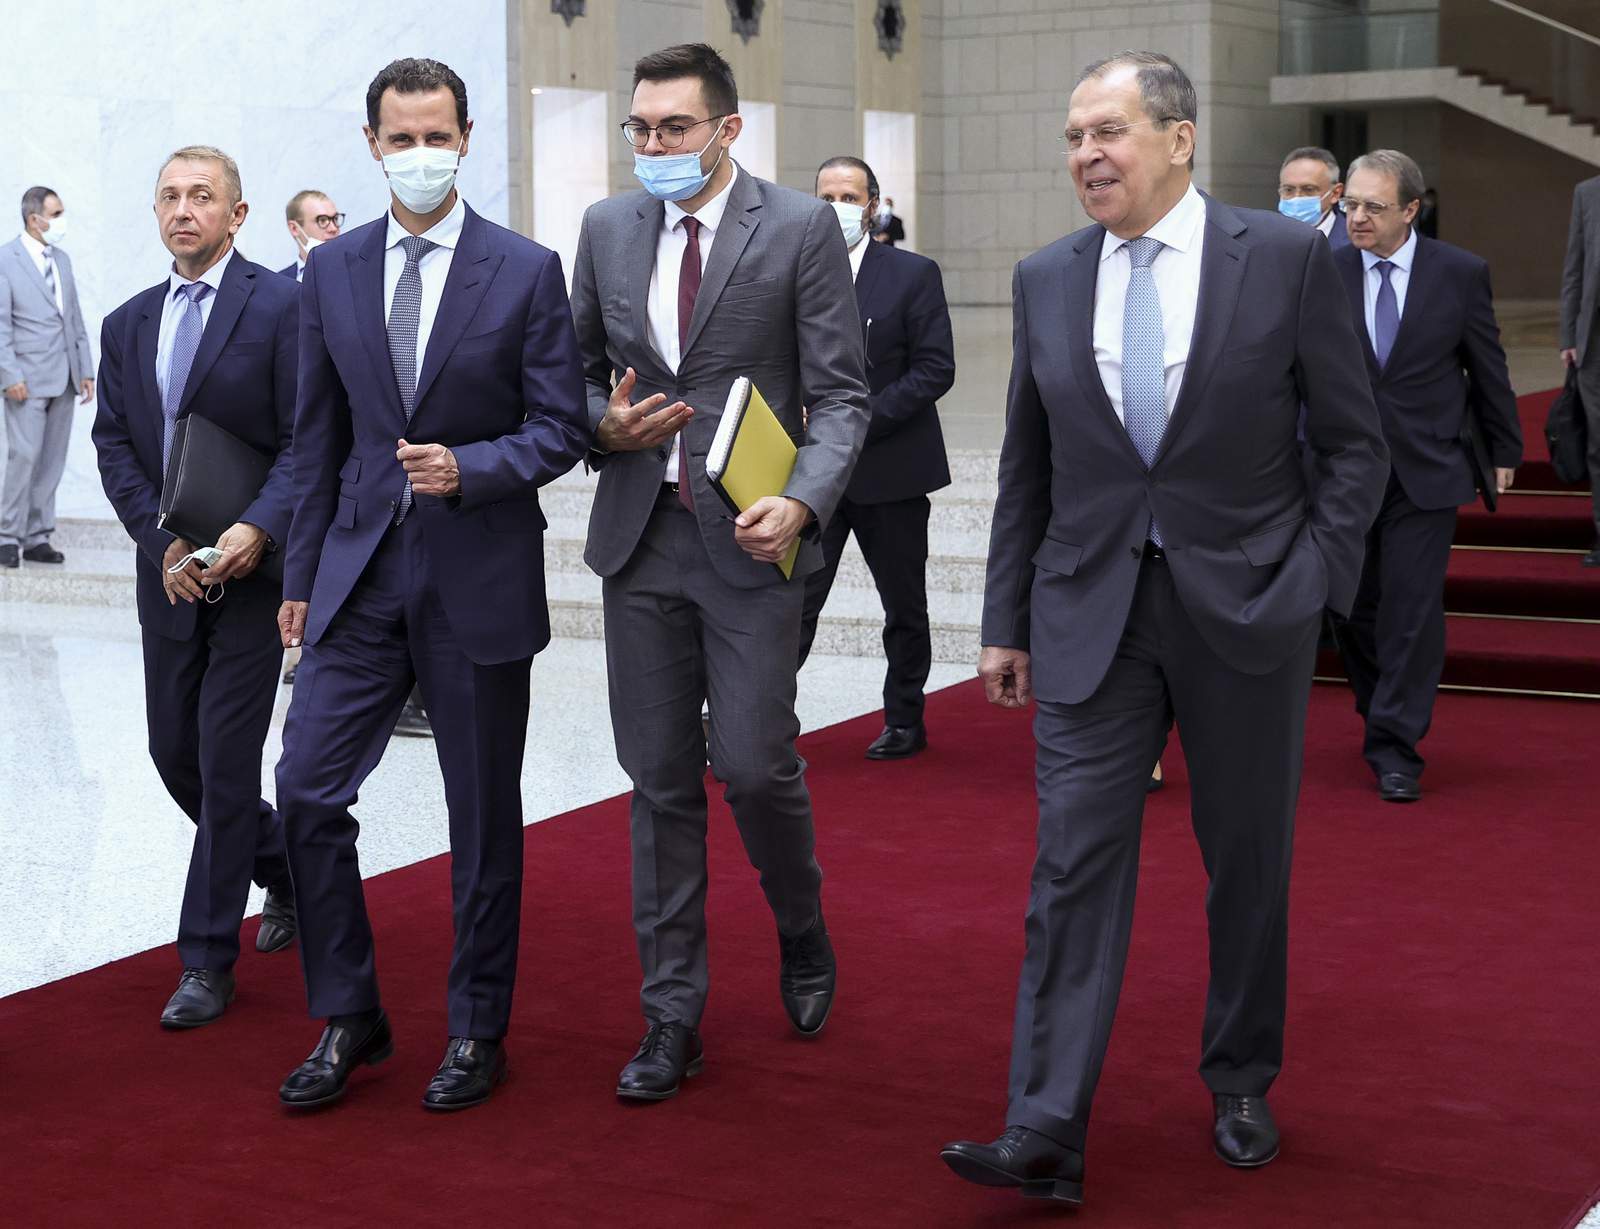 Russian delegation in Syria to expand trade, economic ties